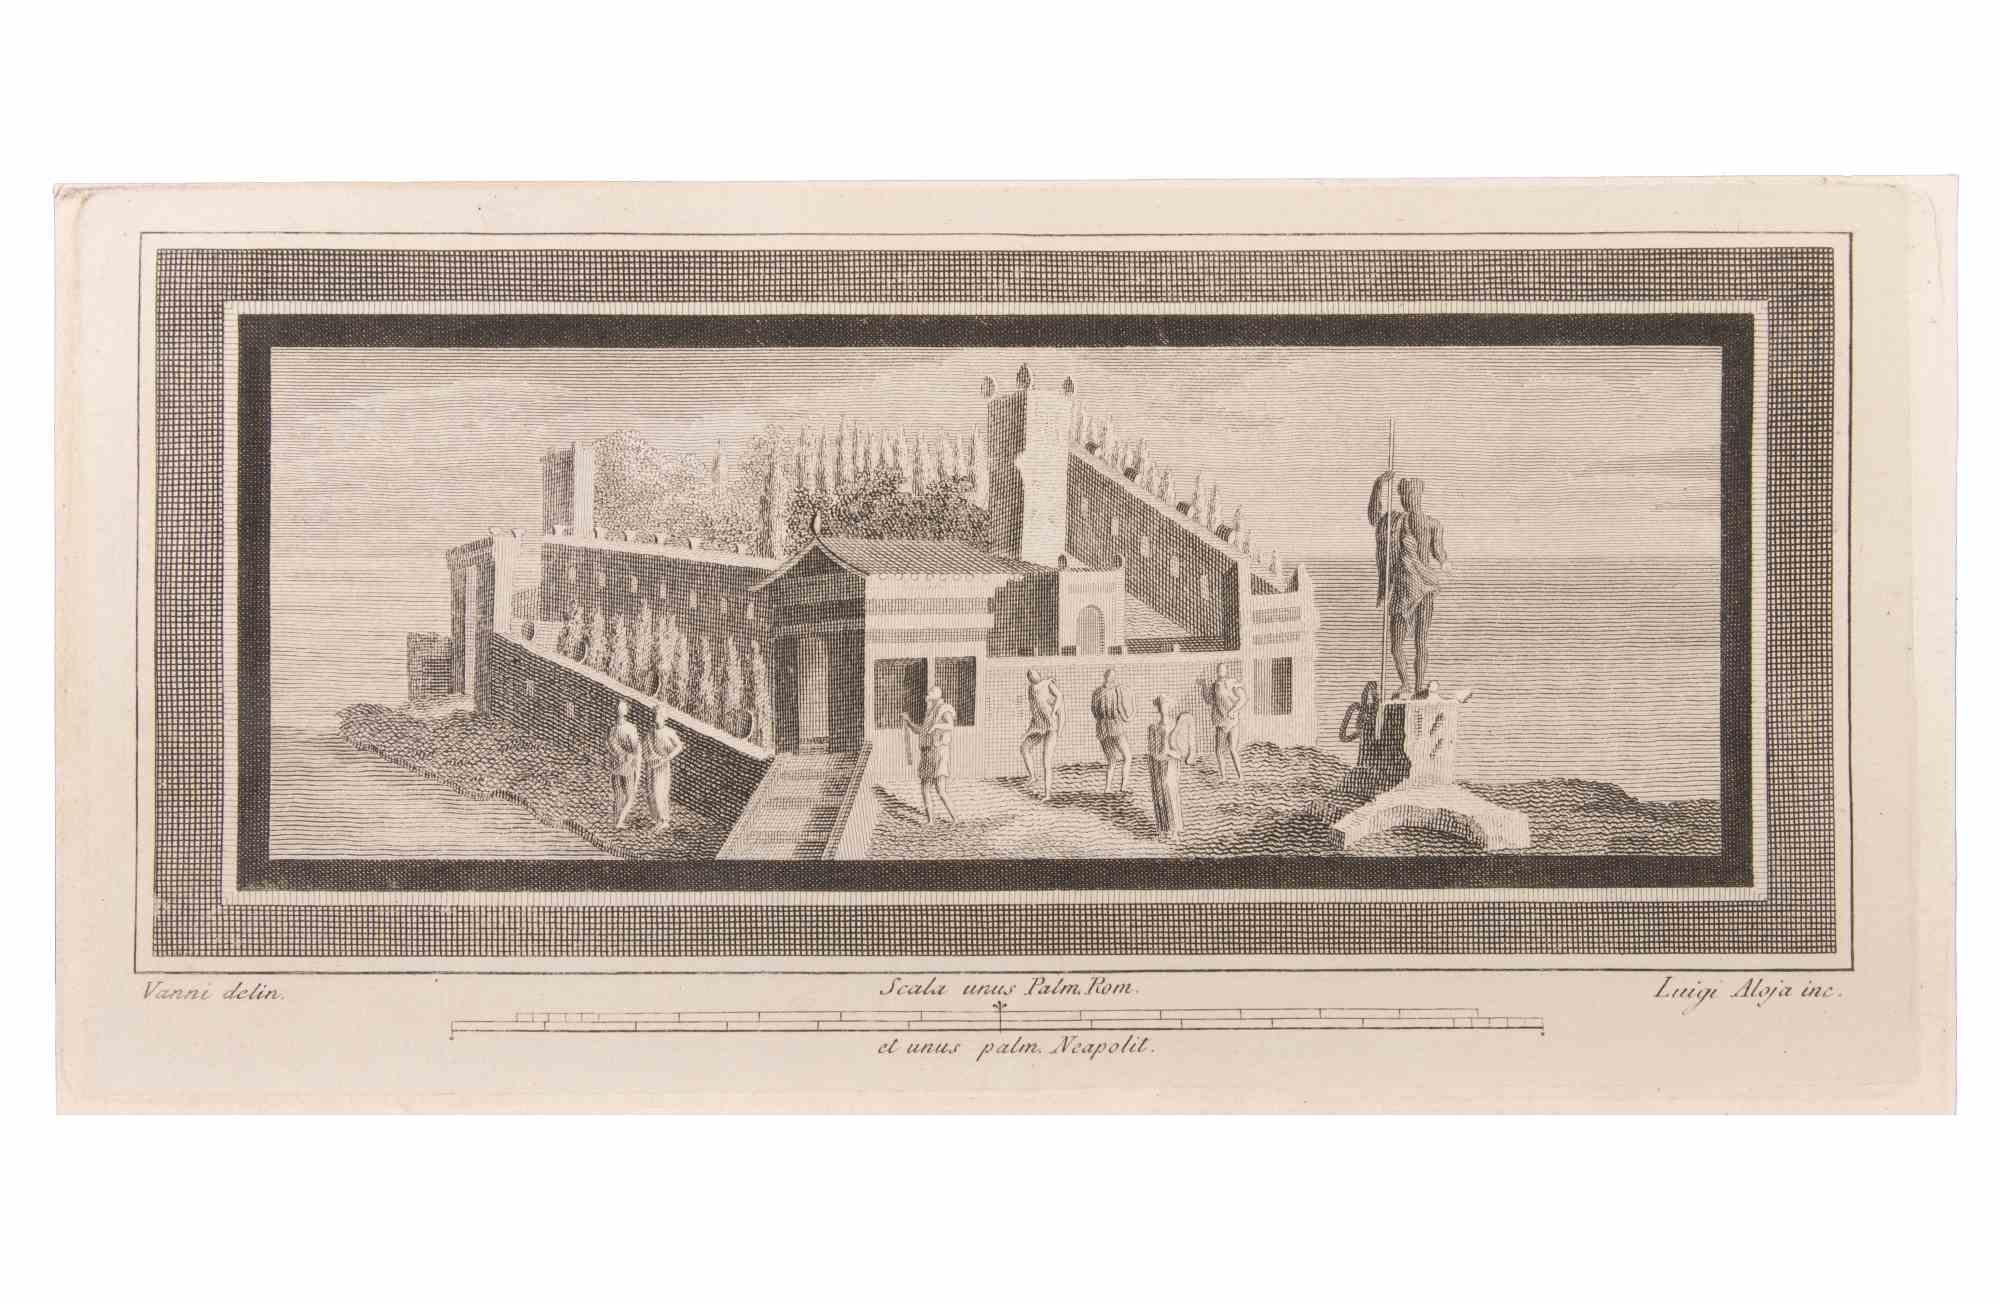 Seascape With Monument and Figures is an Etching realized by  Luigi Aloja (1783-1837).

The etching belongs to the print suite “Antiquities of Herculaneum Exposed” (original title: “Le Antichità di Ercolano Esposte”), an eight-volume volume of